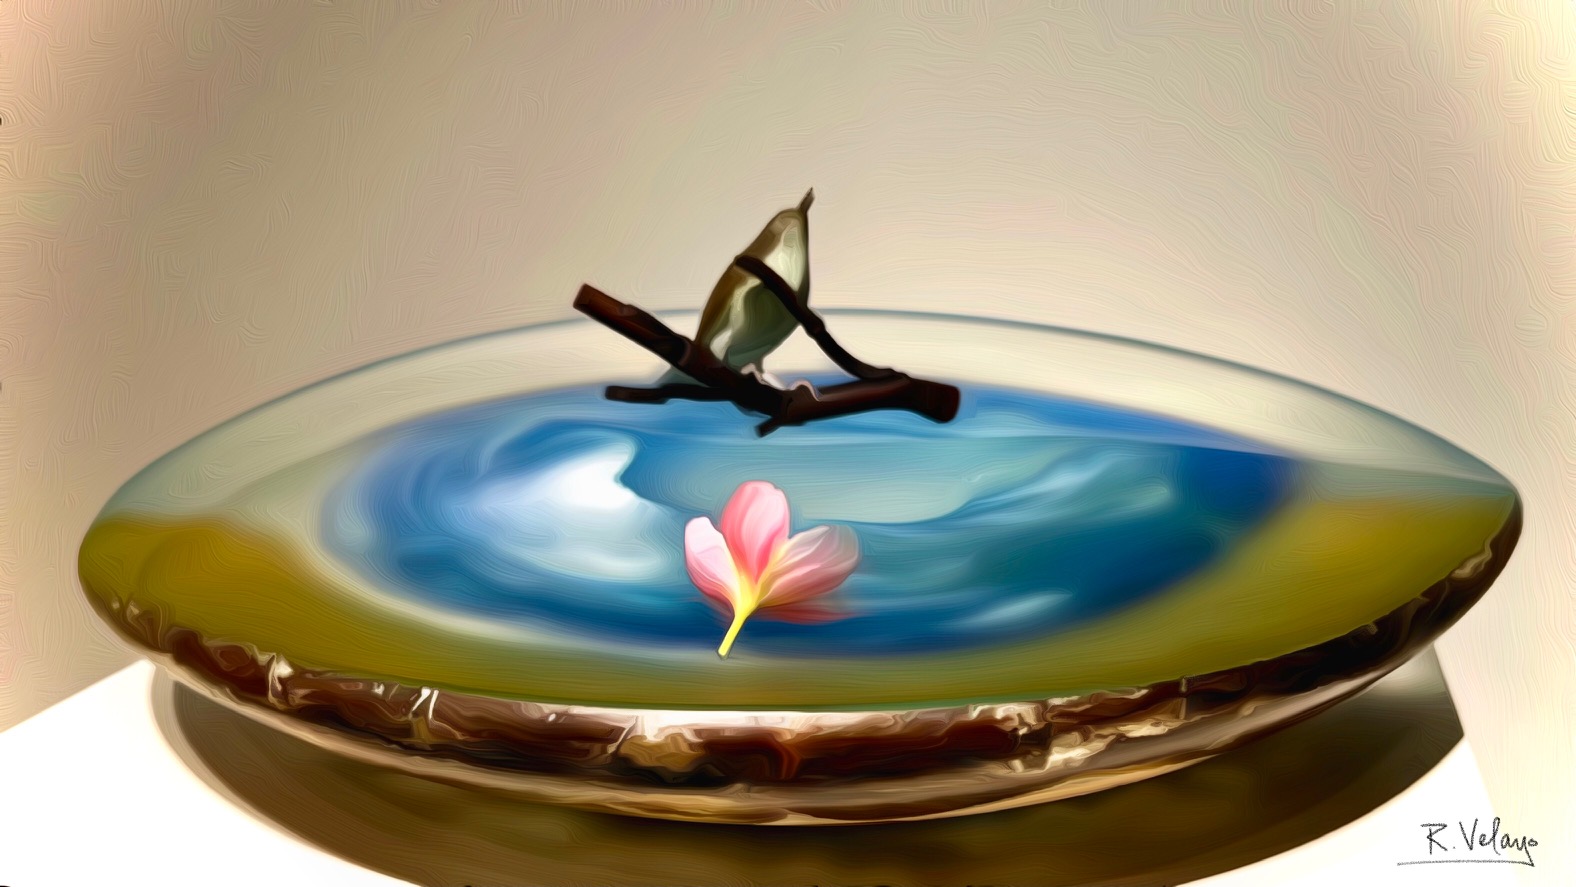 "BIRD PERCHED ON A TWIG IN A GLASS BOWL" [Created: 8/26/2022]